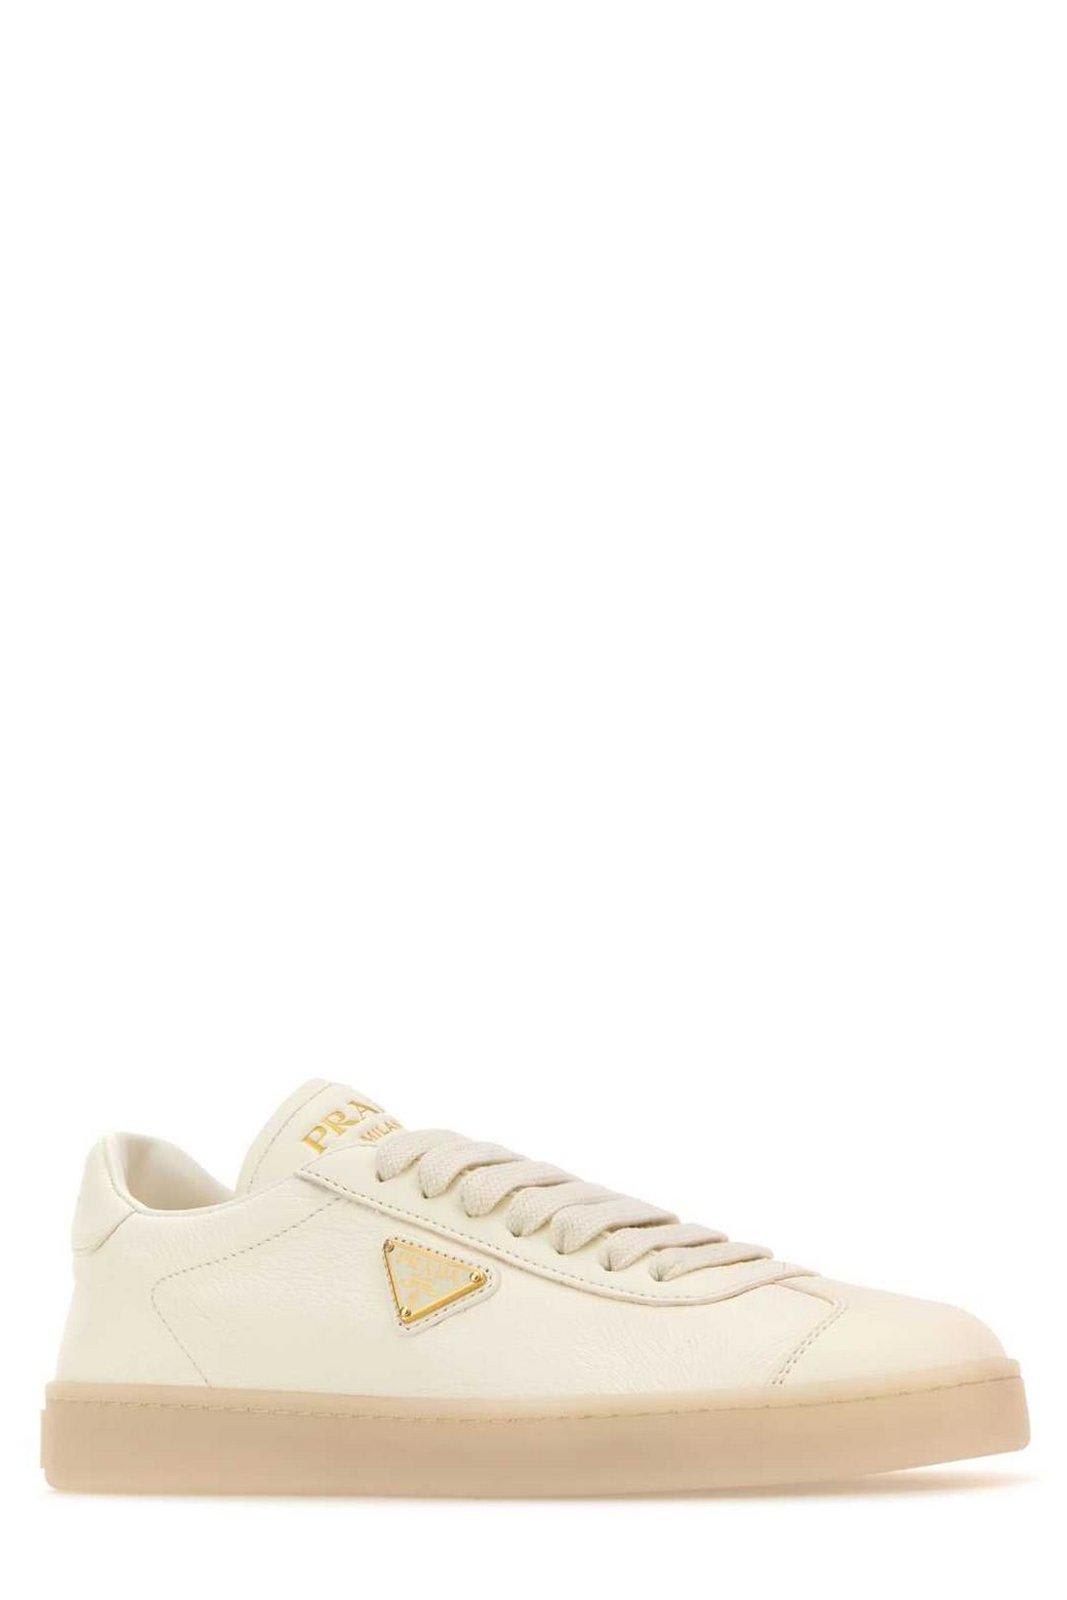 Shop Prada Downtown Lace-up Sneakers In White